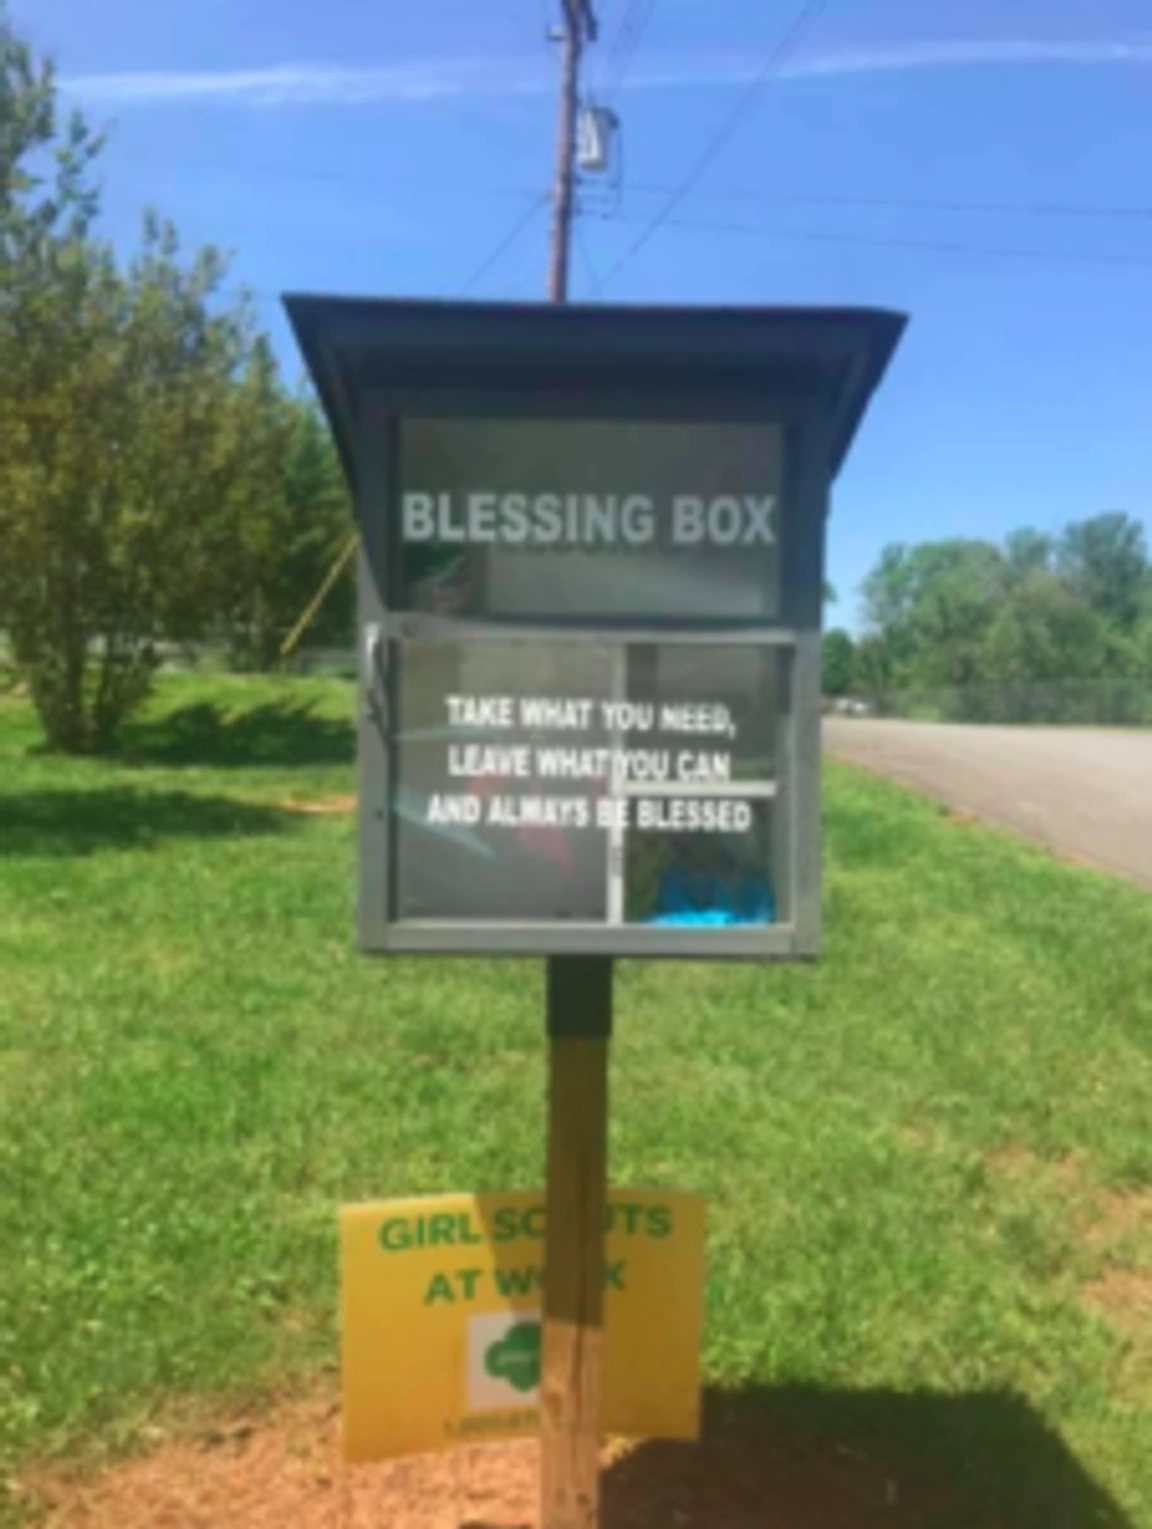 A picture of a blessing box.